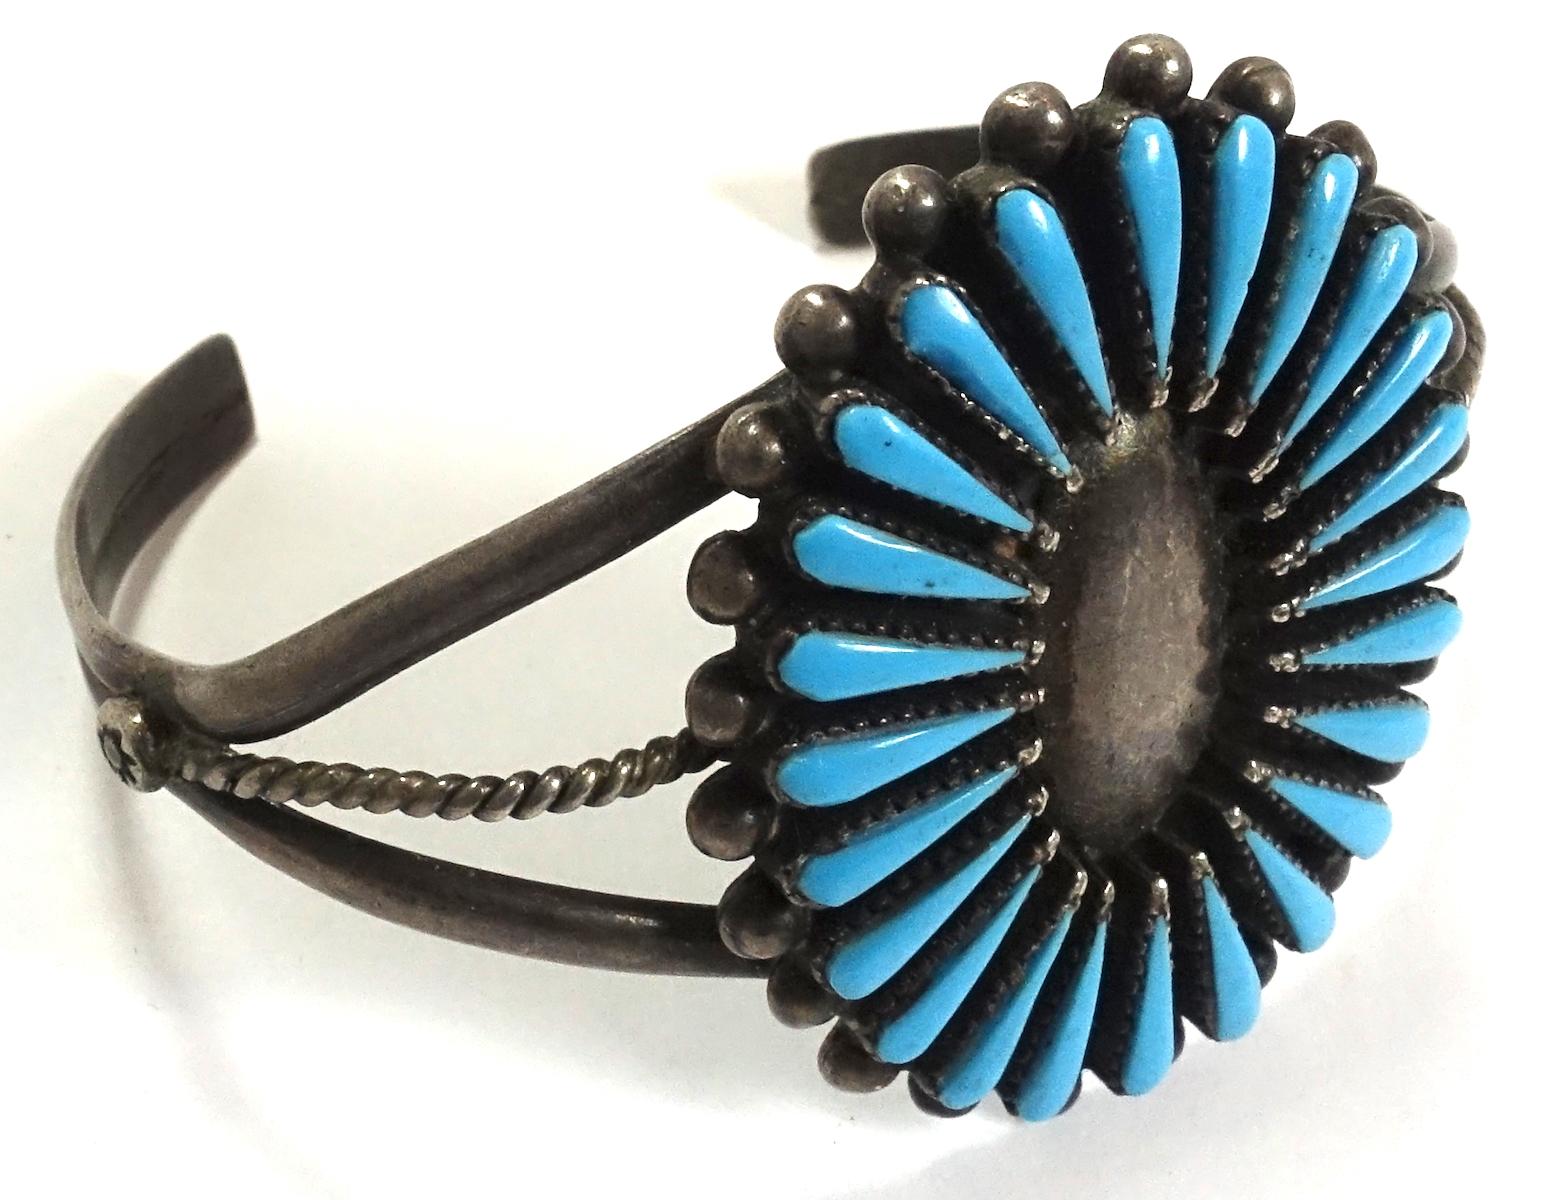 This vintage Zuni cuff bracelet features a needlepoint turquoise stone design in sterling silver.  This adjustable cuff is signed “Sterling”, measures 6” around the inside and the centerpiece is 1-1/2” x 1-1/4”.  It was originally created for a